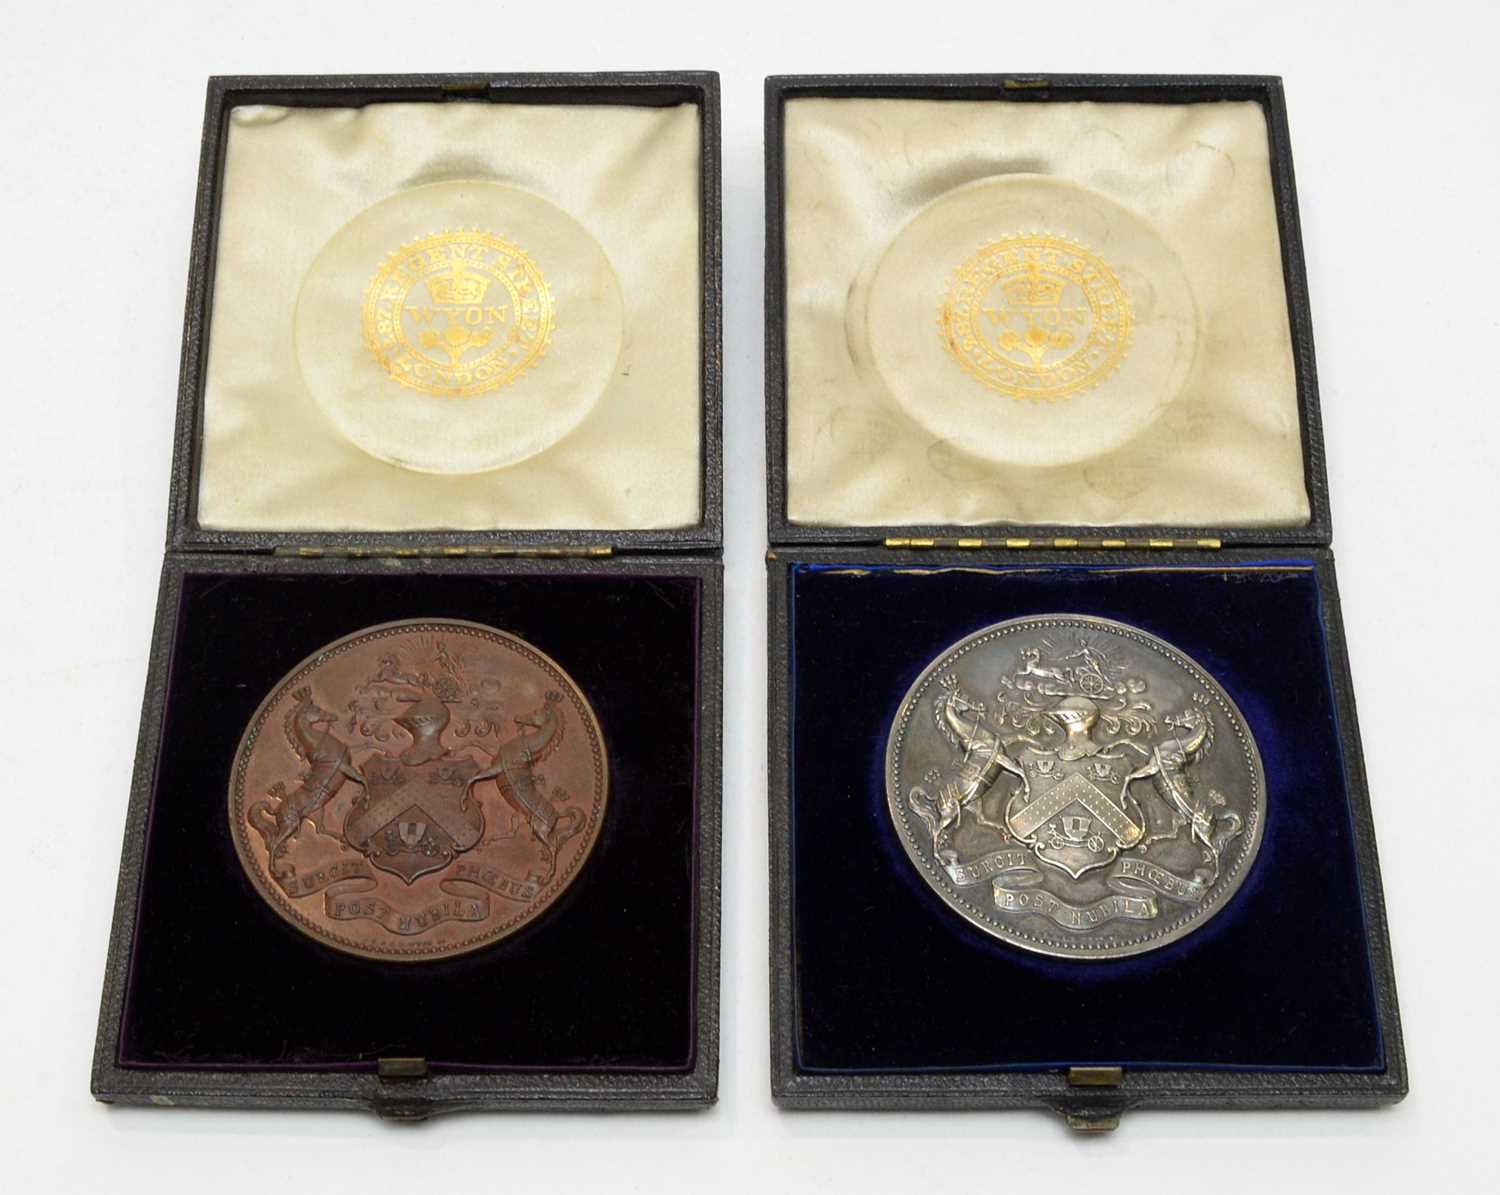 Lot 126 - Two award medallions for The Worshipful Company of Coach Makers and Coach Harness Makers